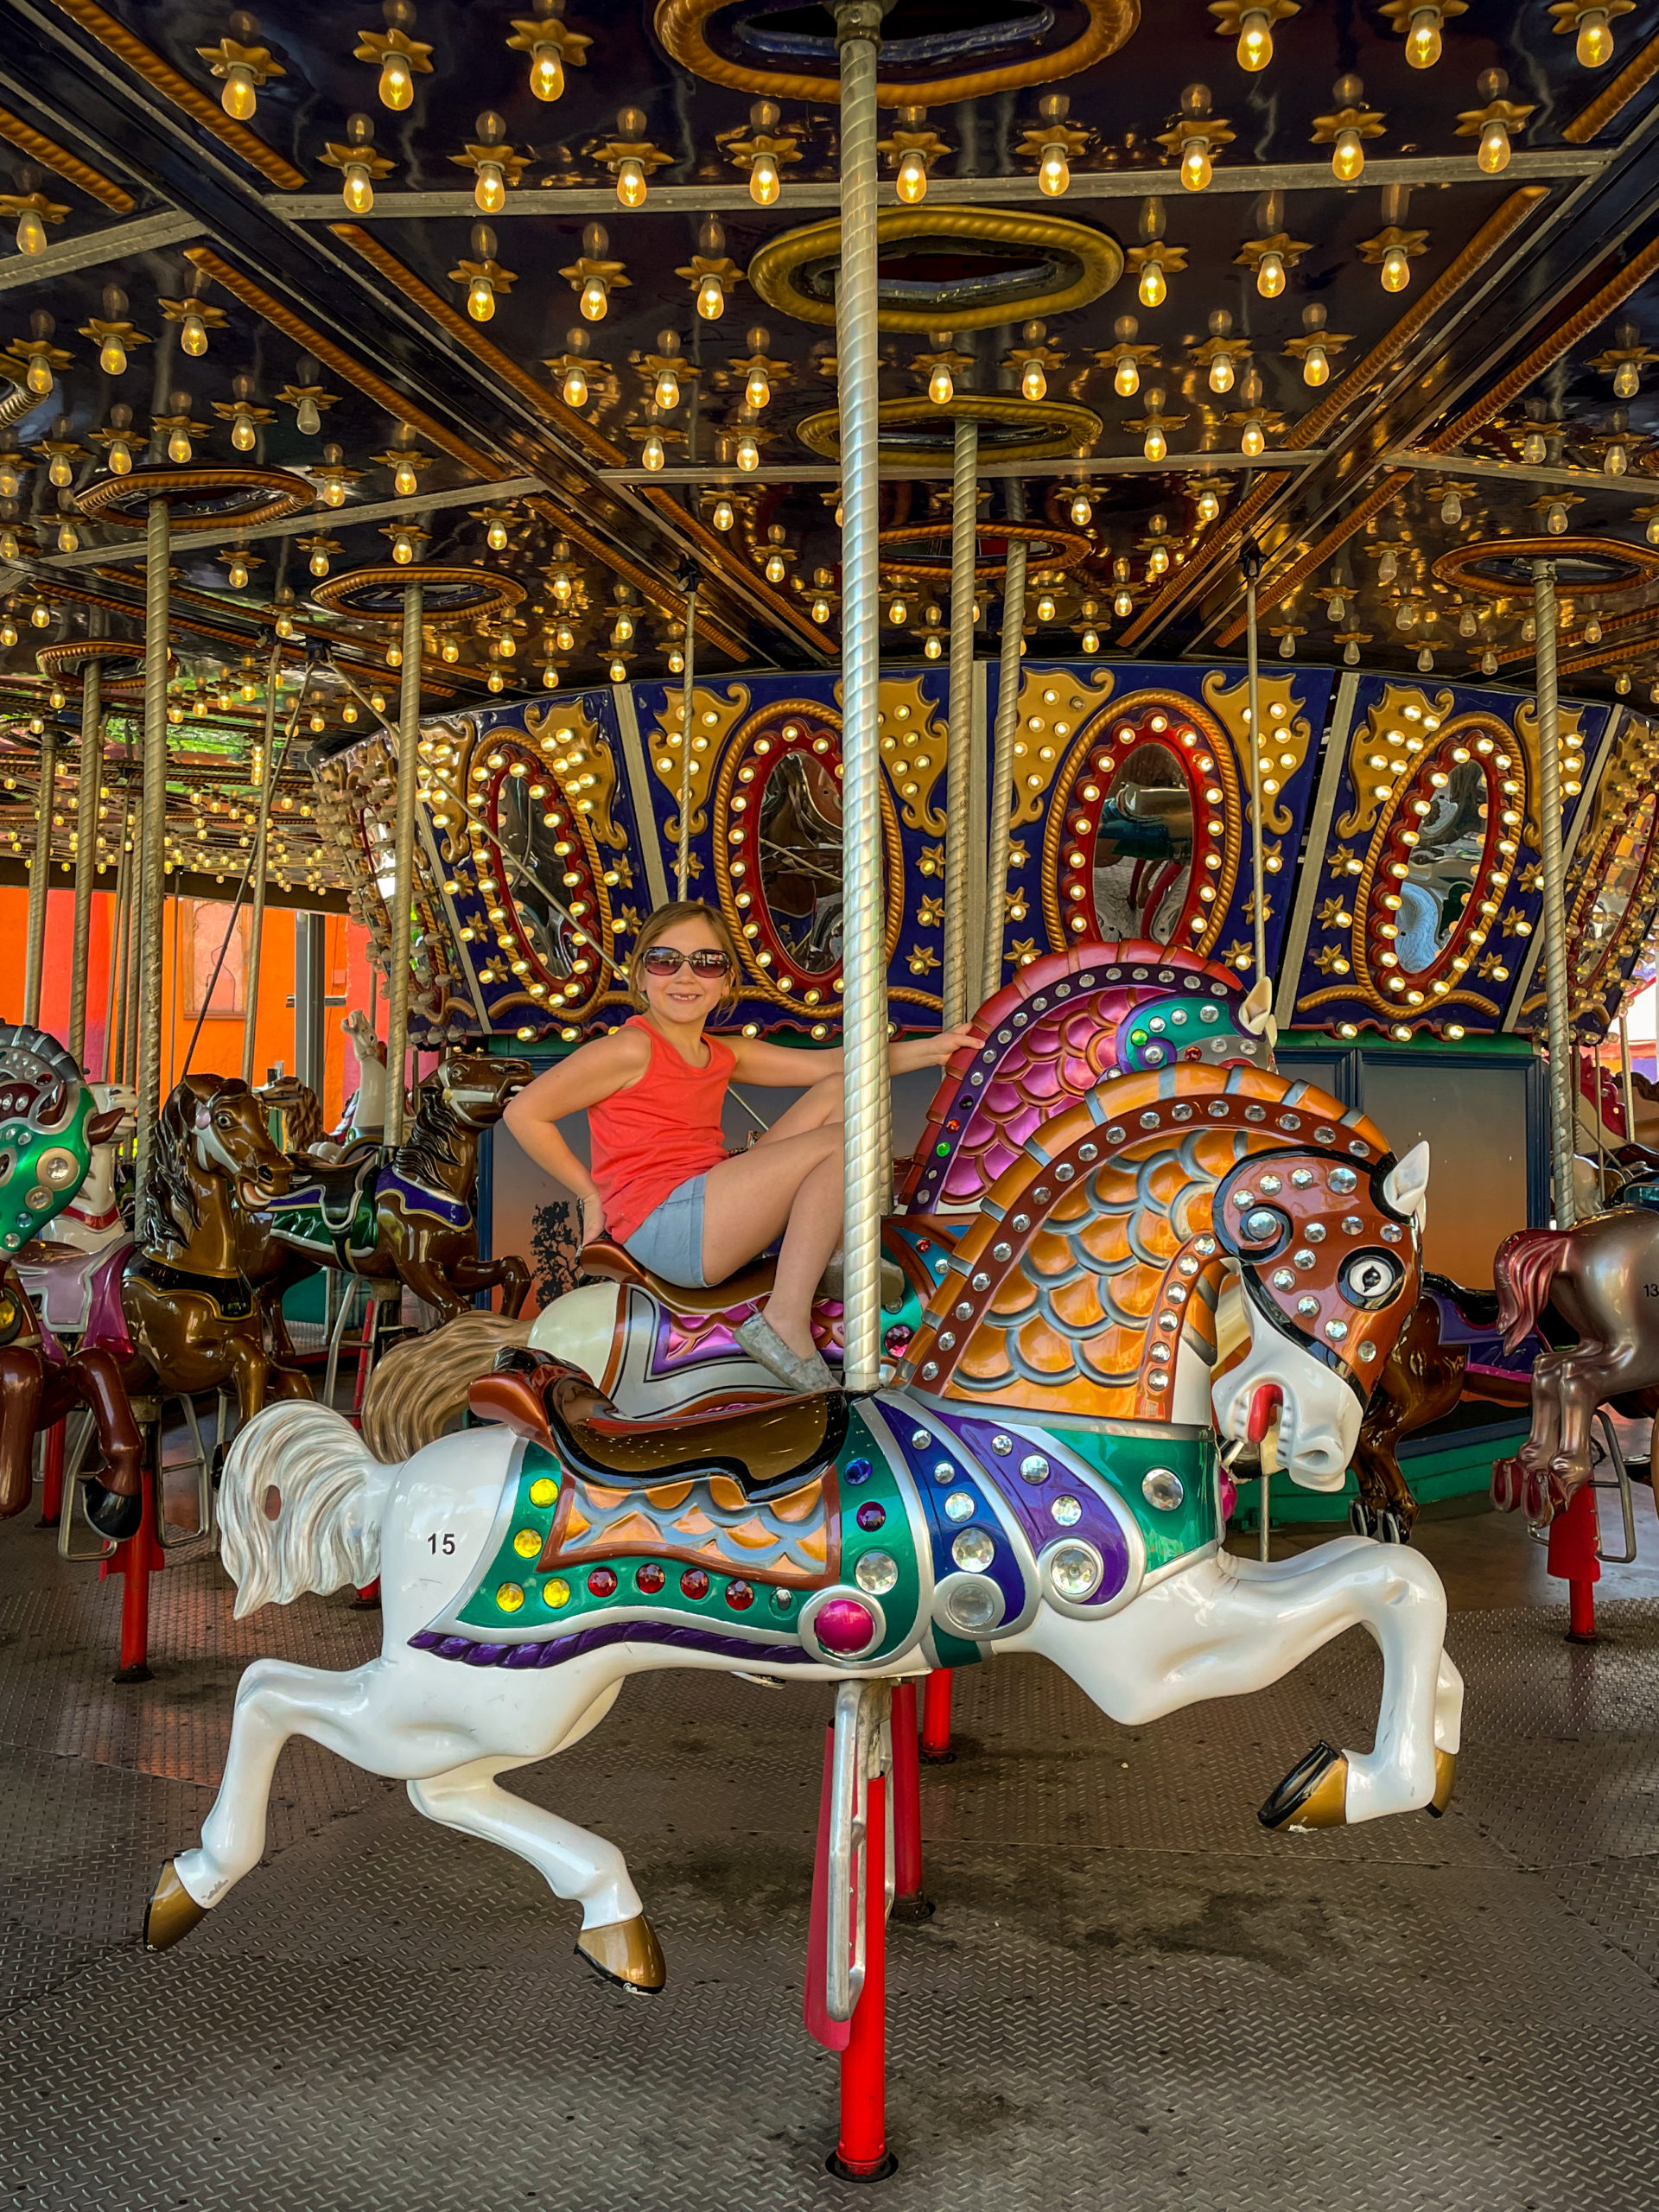 A young girl sits on a carousel horse at Busch Gardens® Tampa Bay.